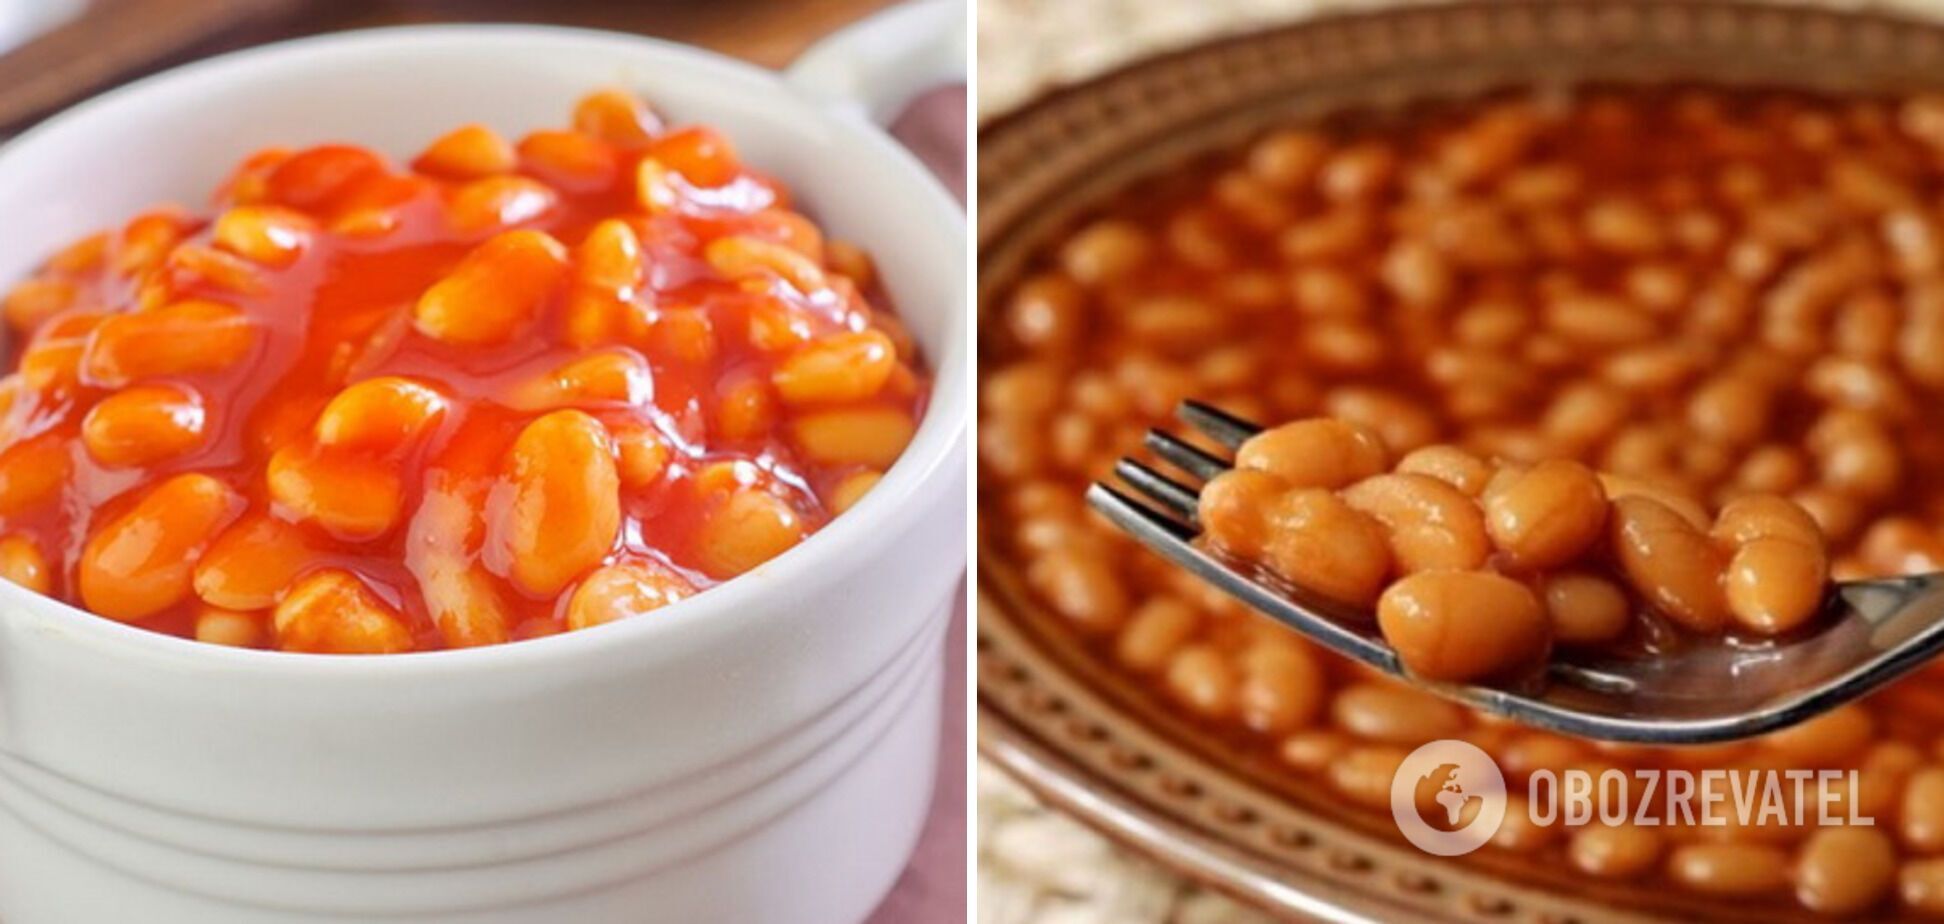 Beans with tomato